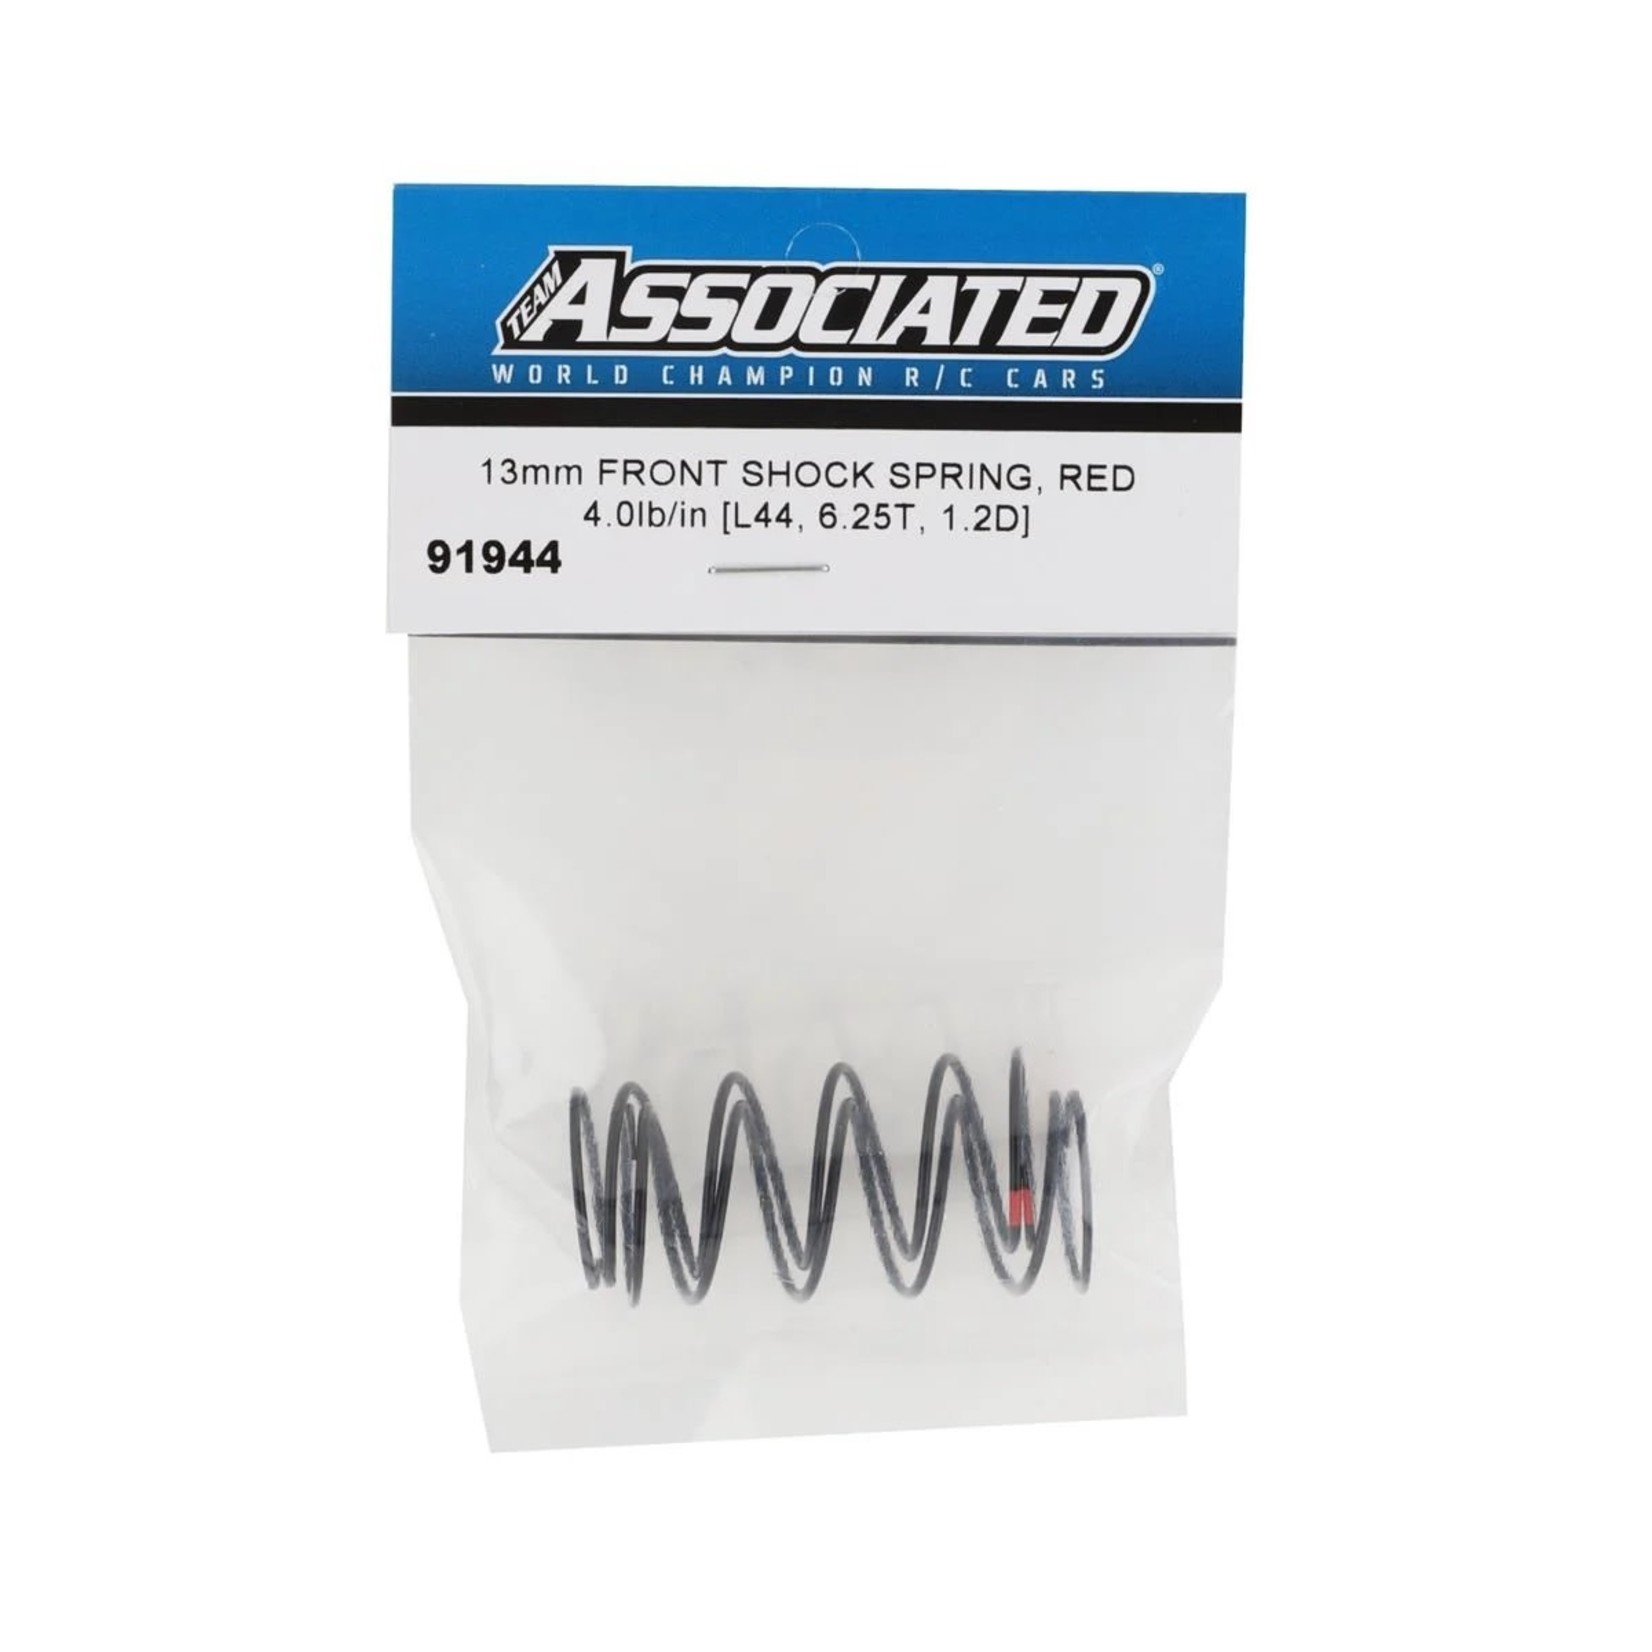 Team Associated Team Associated 13mm Front Shock Spring (Red/4.0lbs) (44mm) #91944